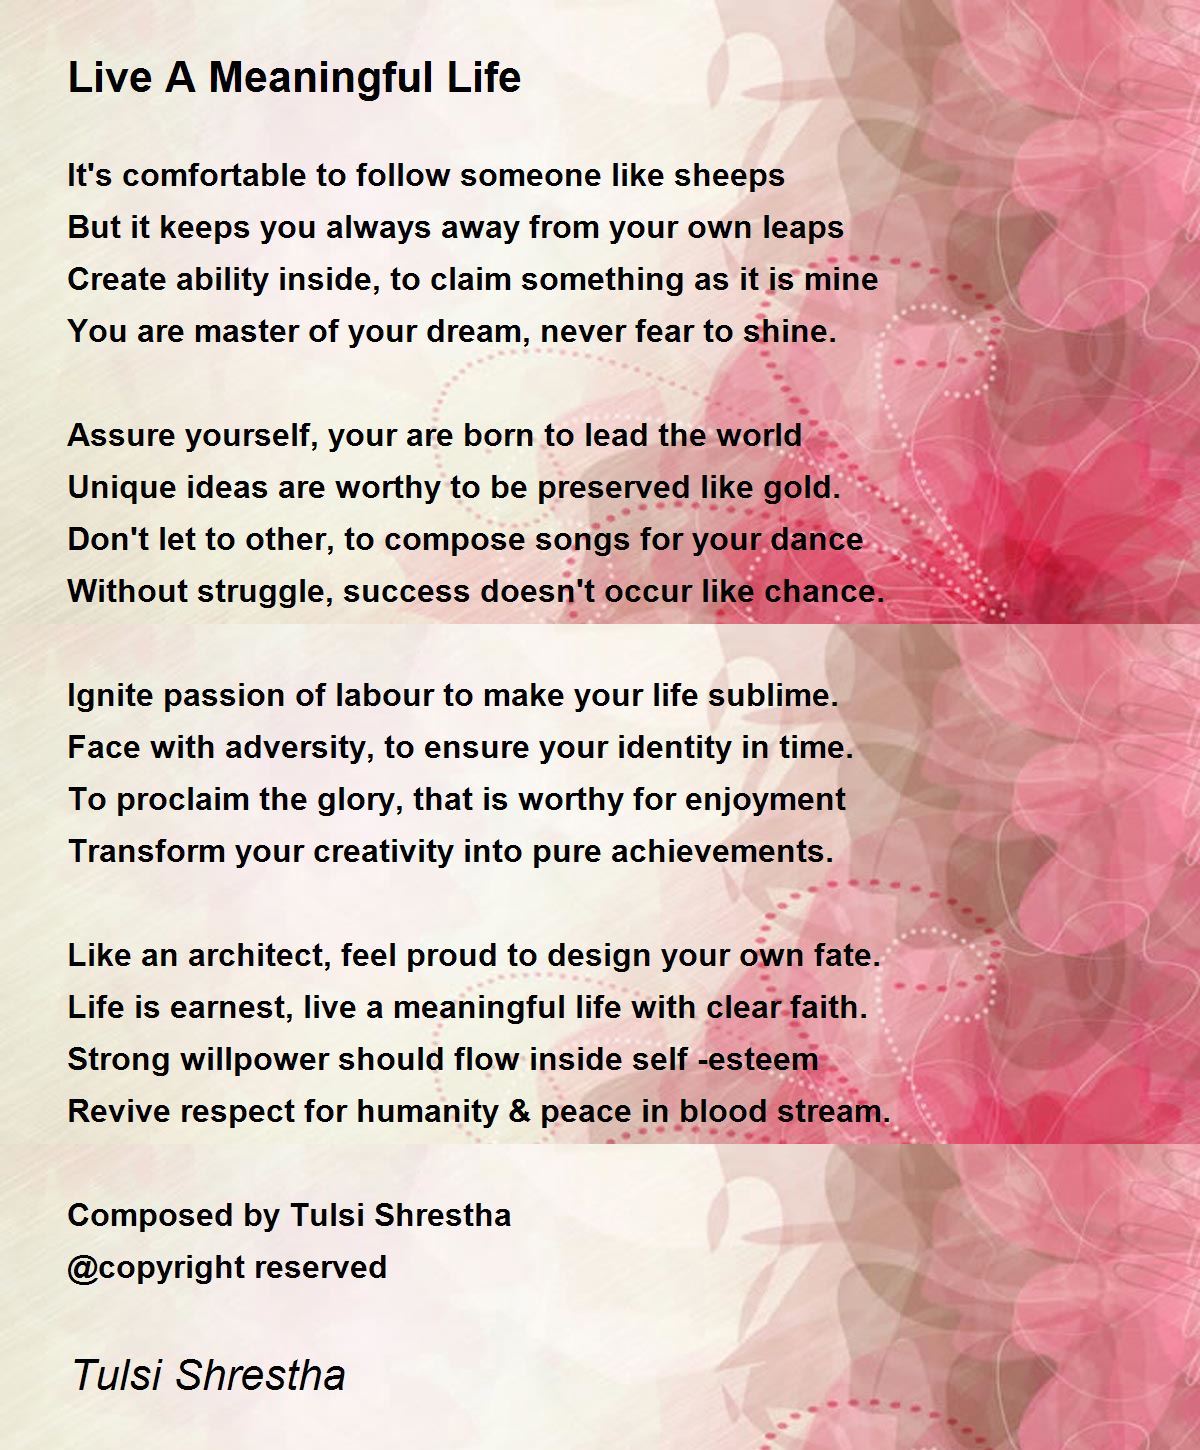 Live A Meaningful Life - Live A Meaningful Life Poem by Tulsi Shrestha